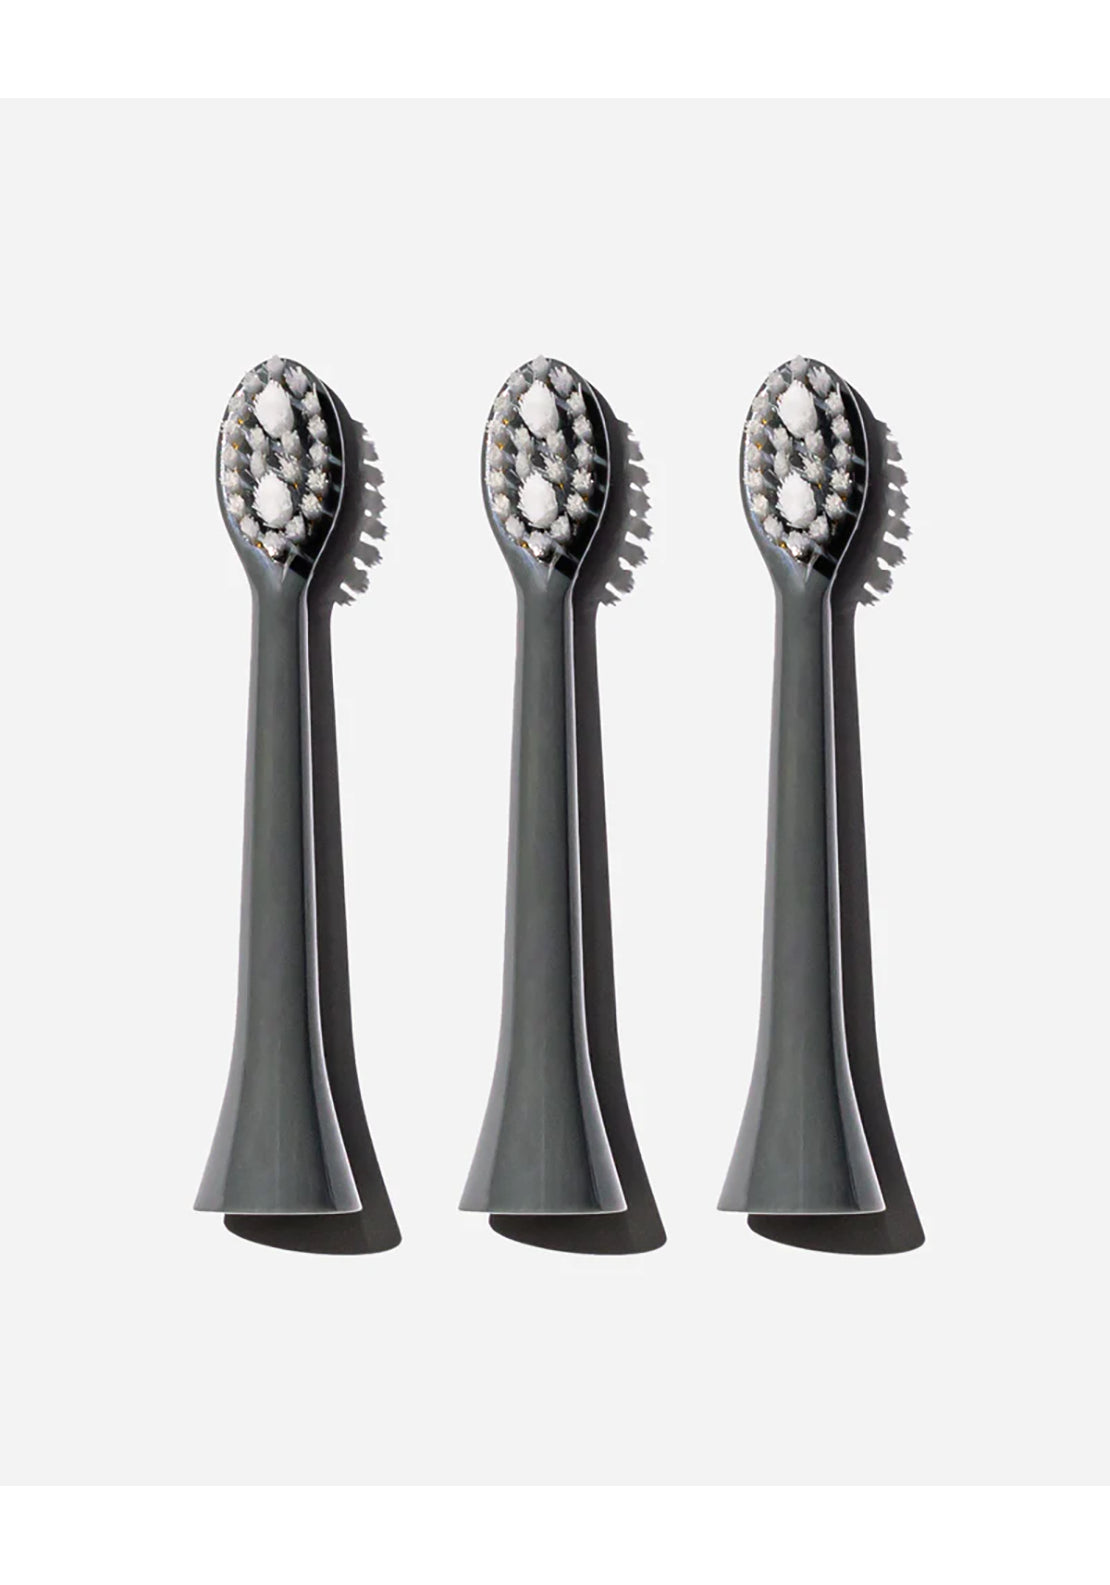 Spotlight Oral Care Sonic Toothbrush Replacement Heads - Graphite Grey 1 Shaws Department Stores